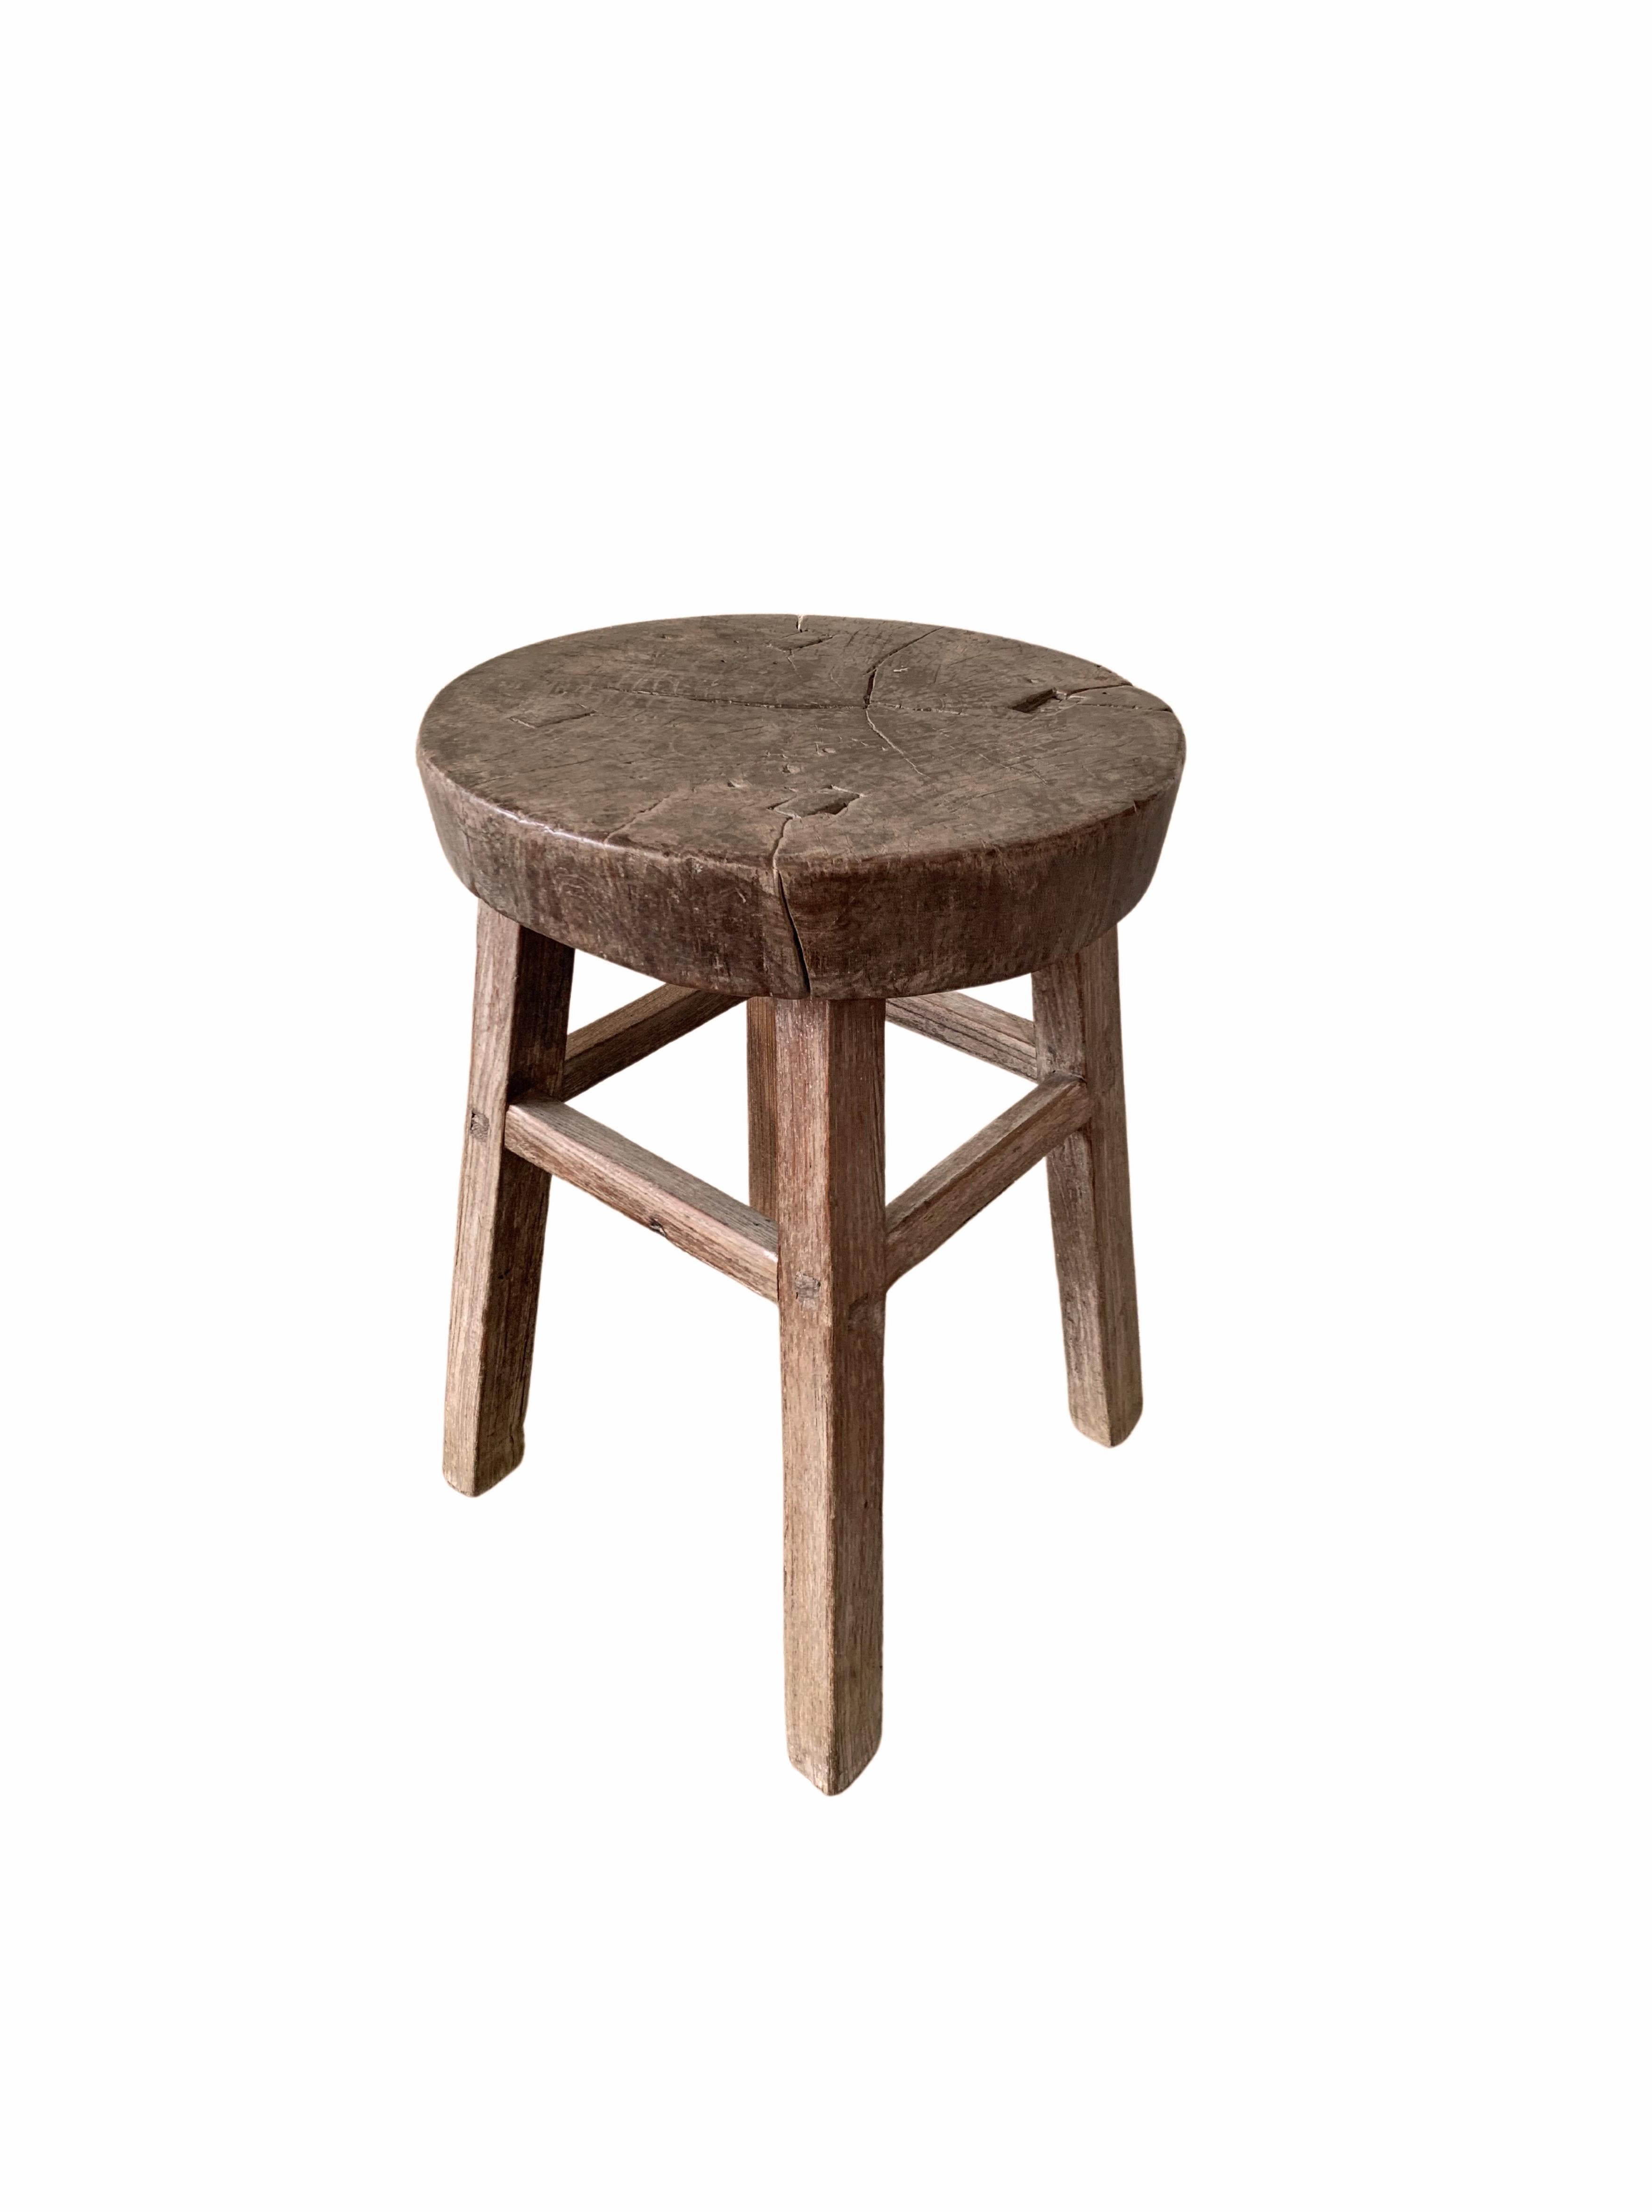 Hand-Carved Antique Chinese Elm Wood Stool, Early 20th Century